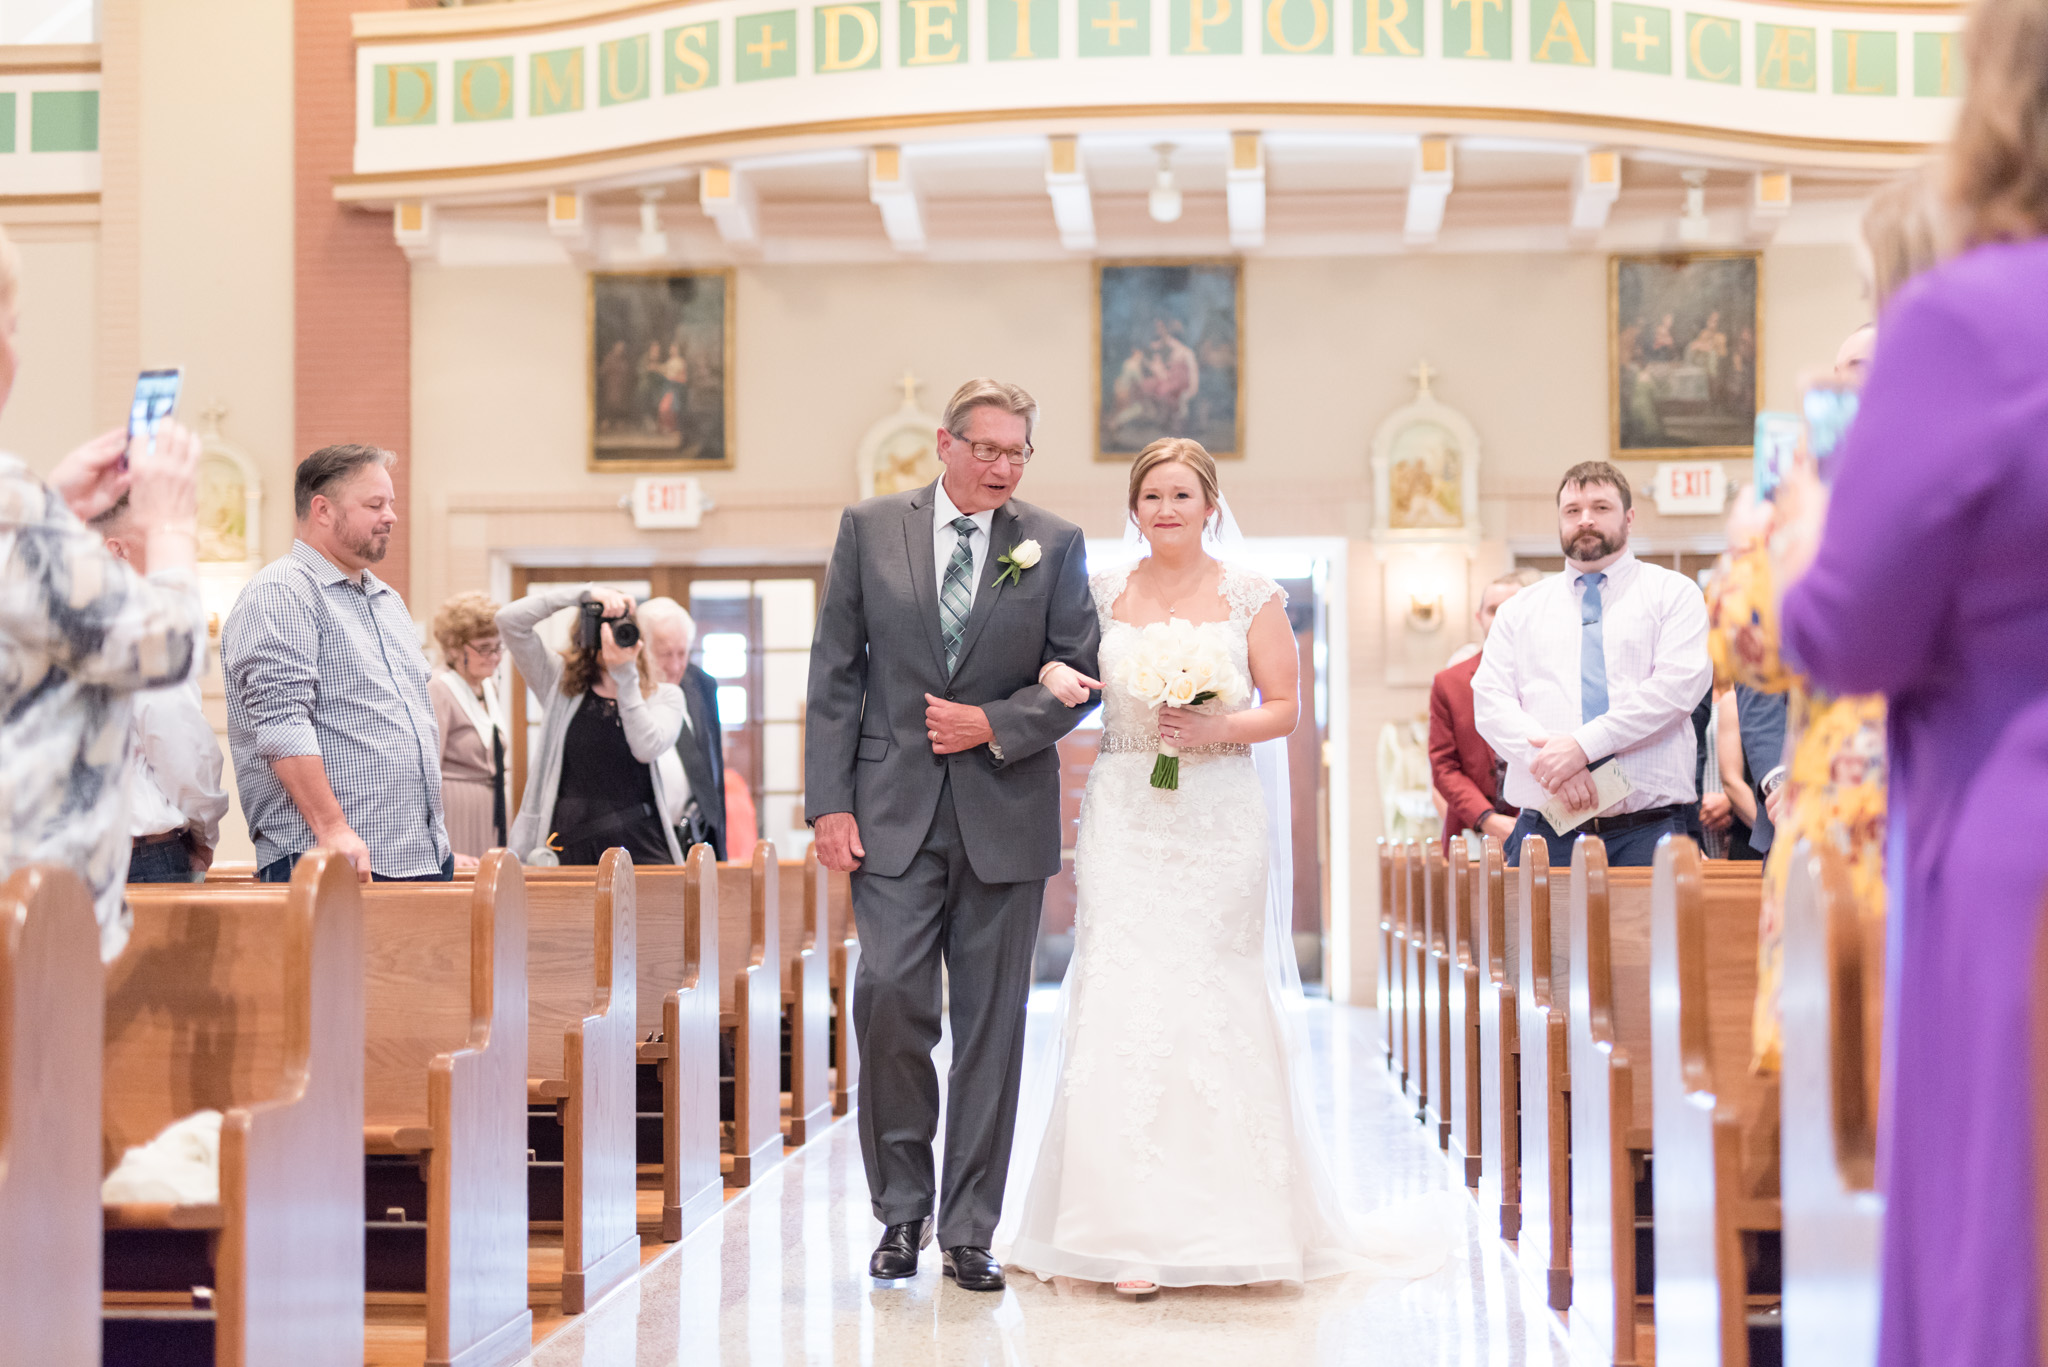 Bride and father walk down aisle.